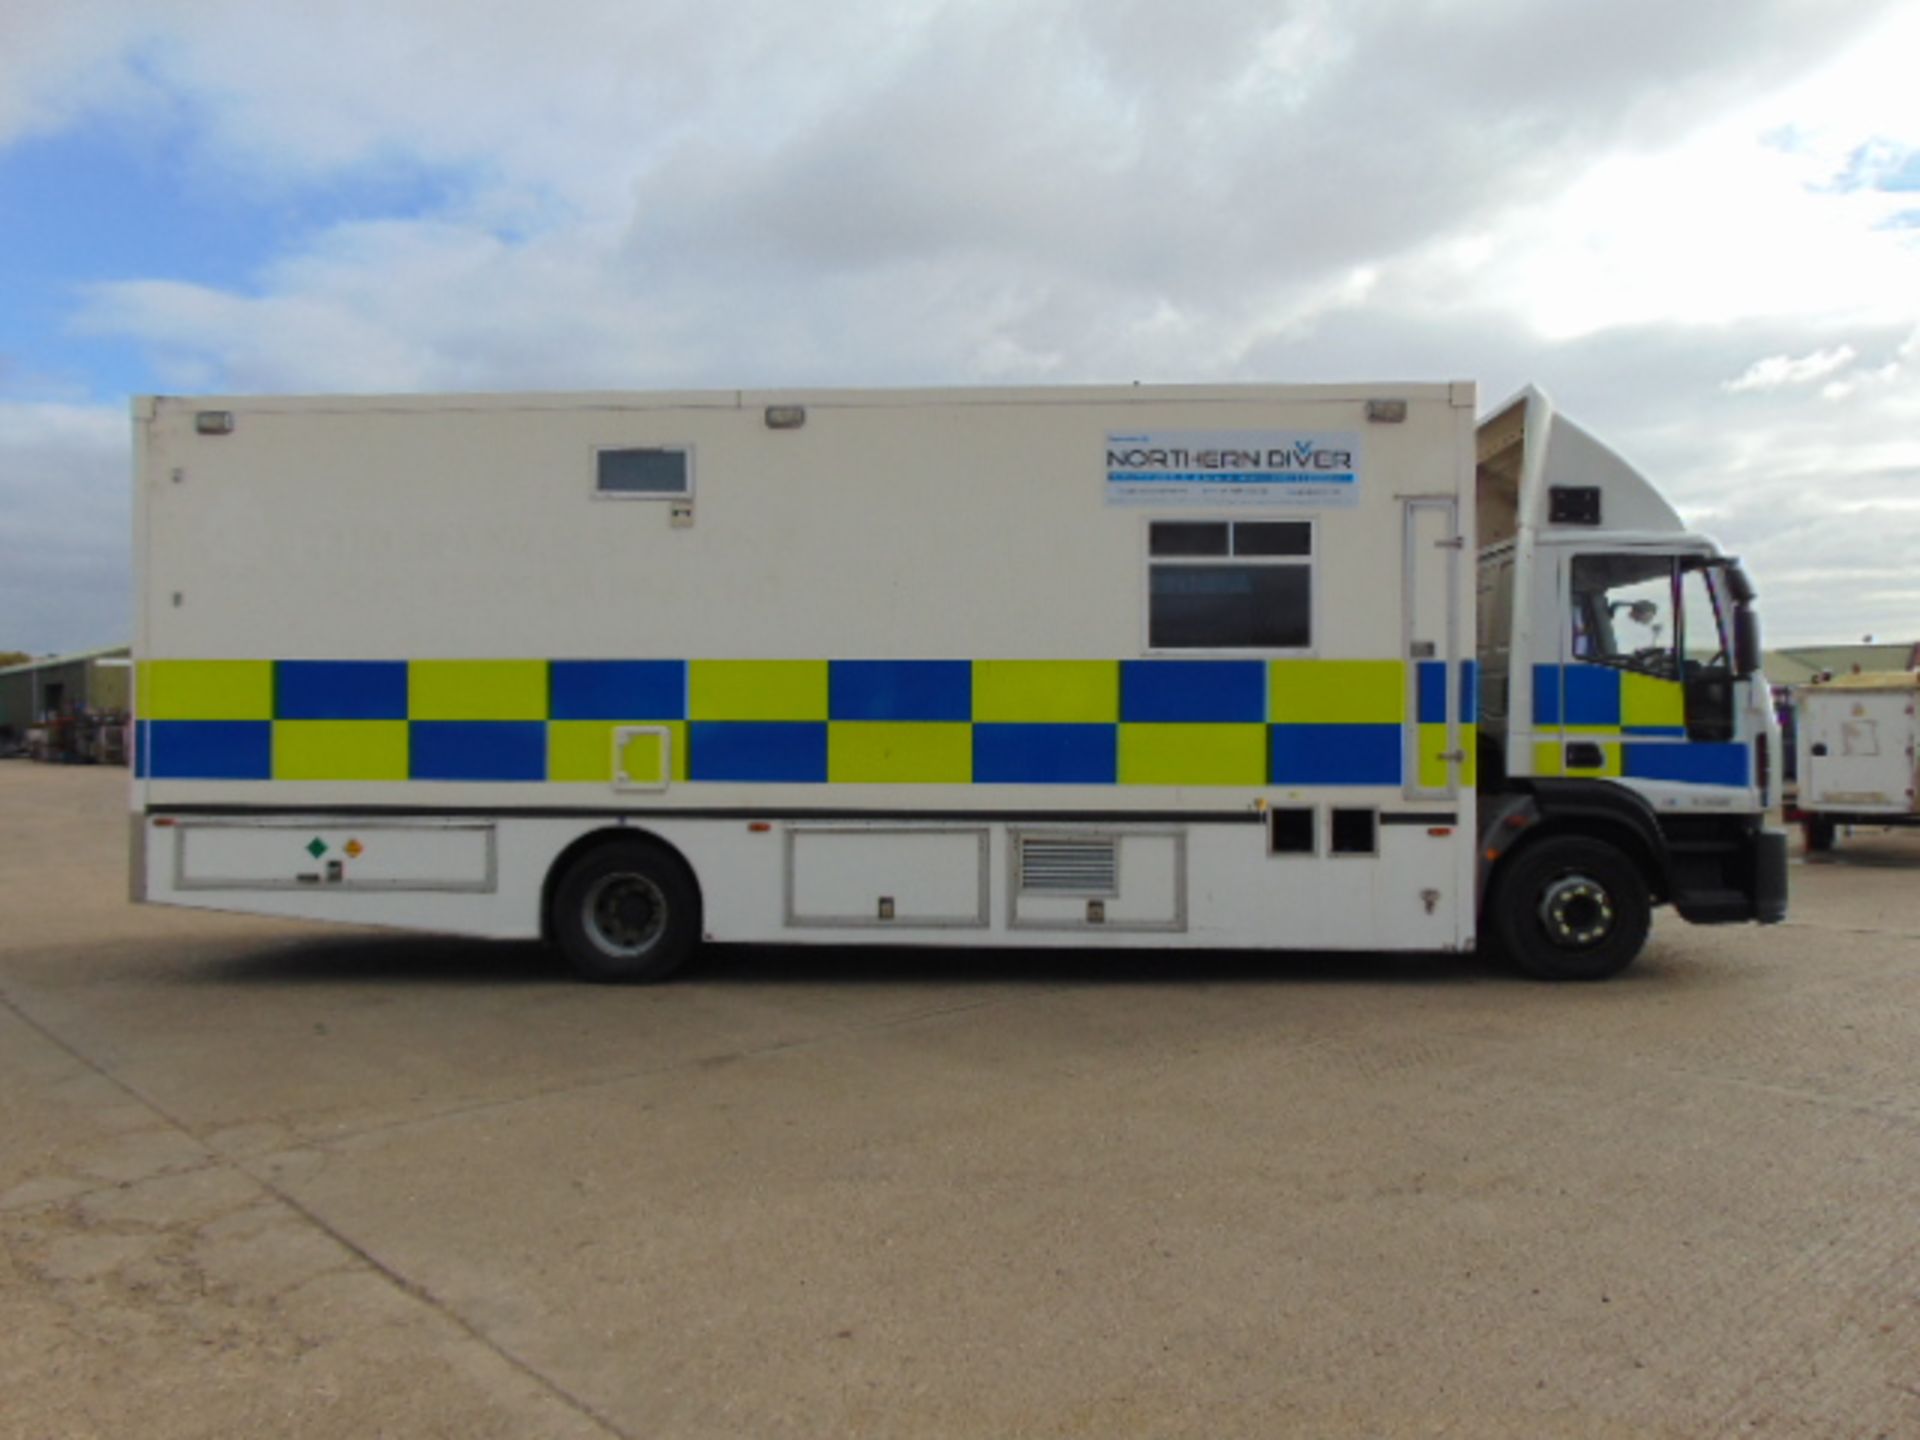 2010 Iveco 150 E25 4x2 Dive Support Vehicle - Image 5 of 52